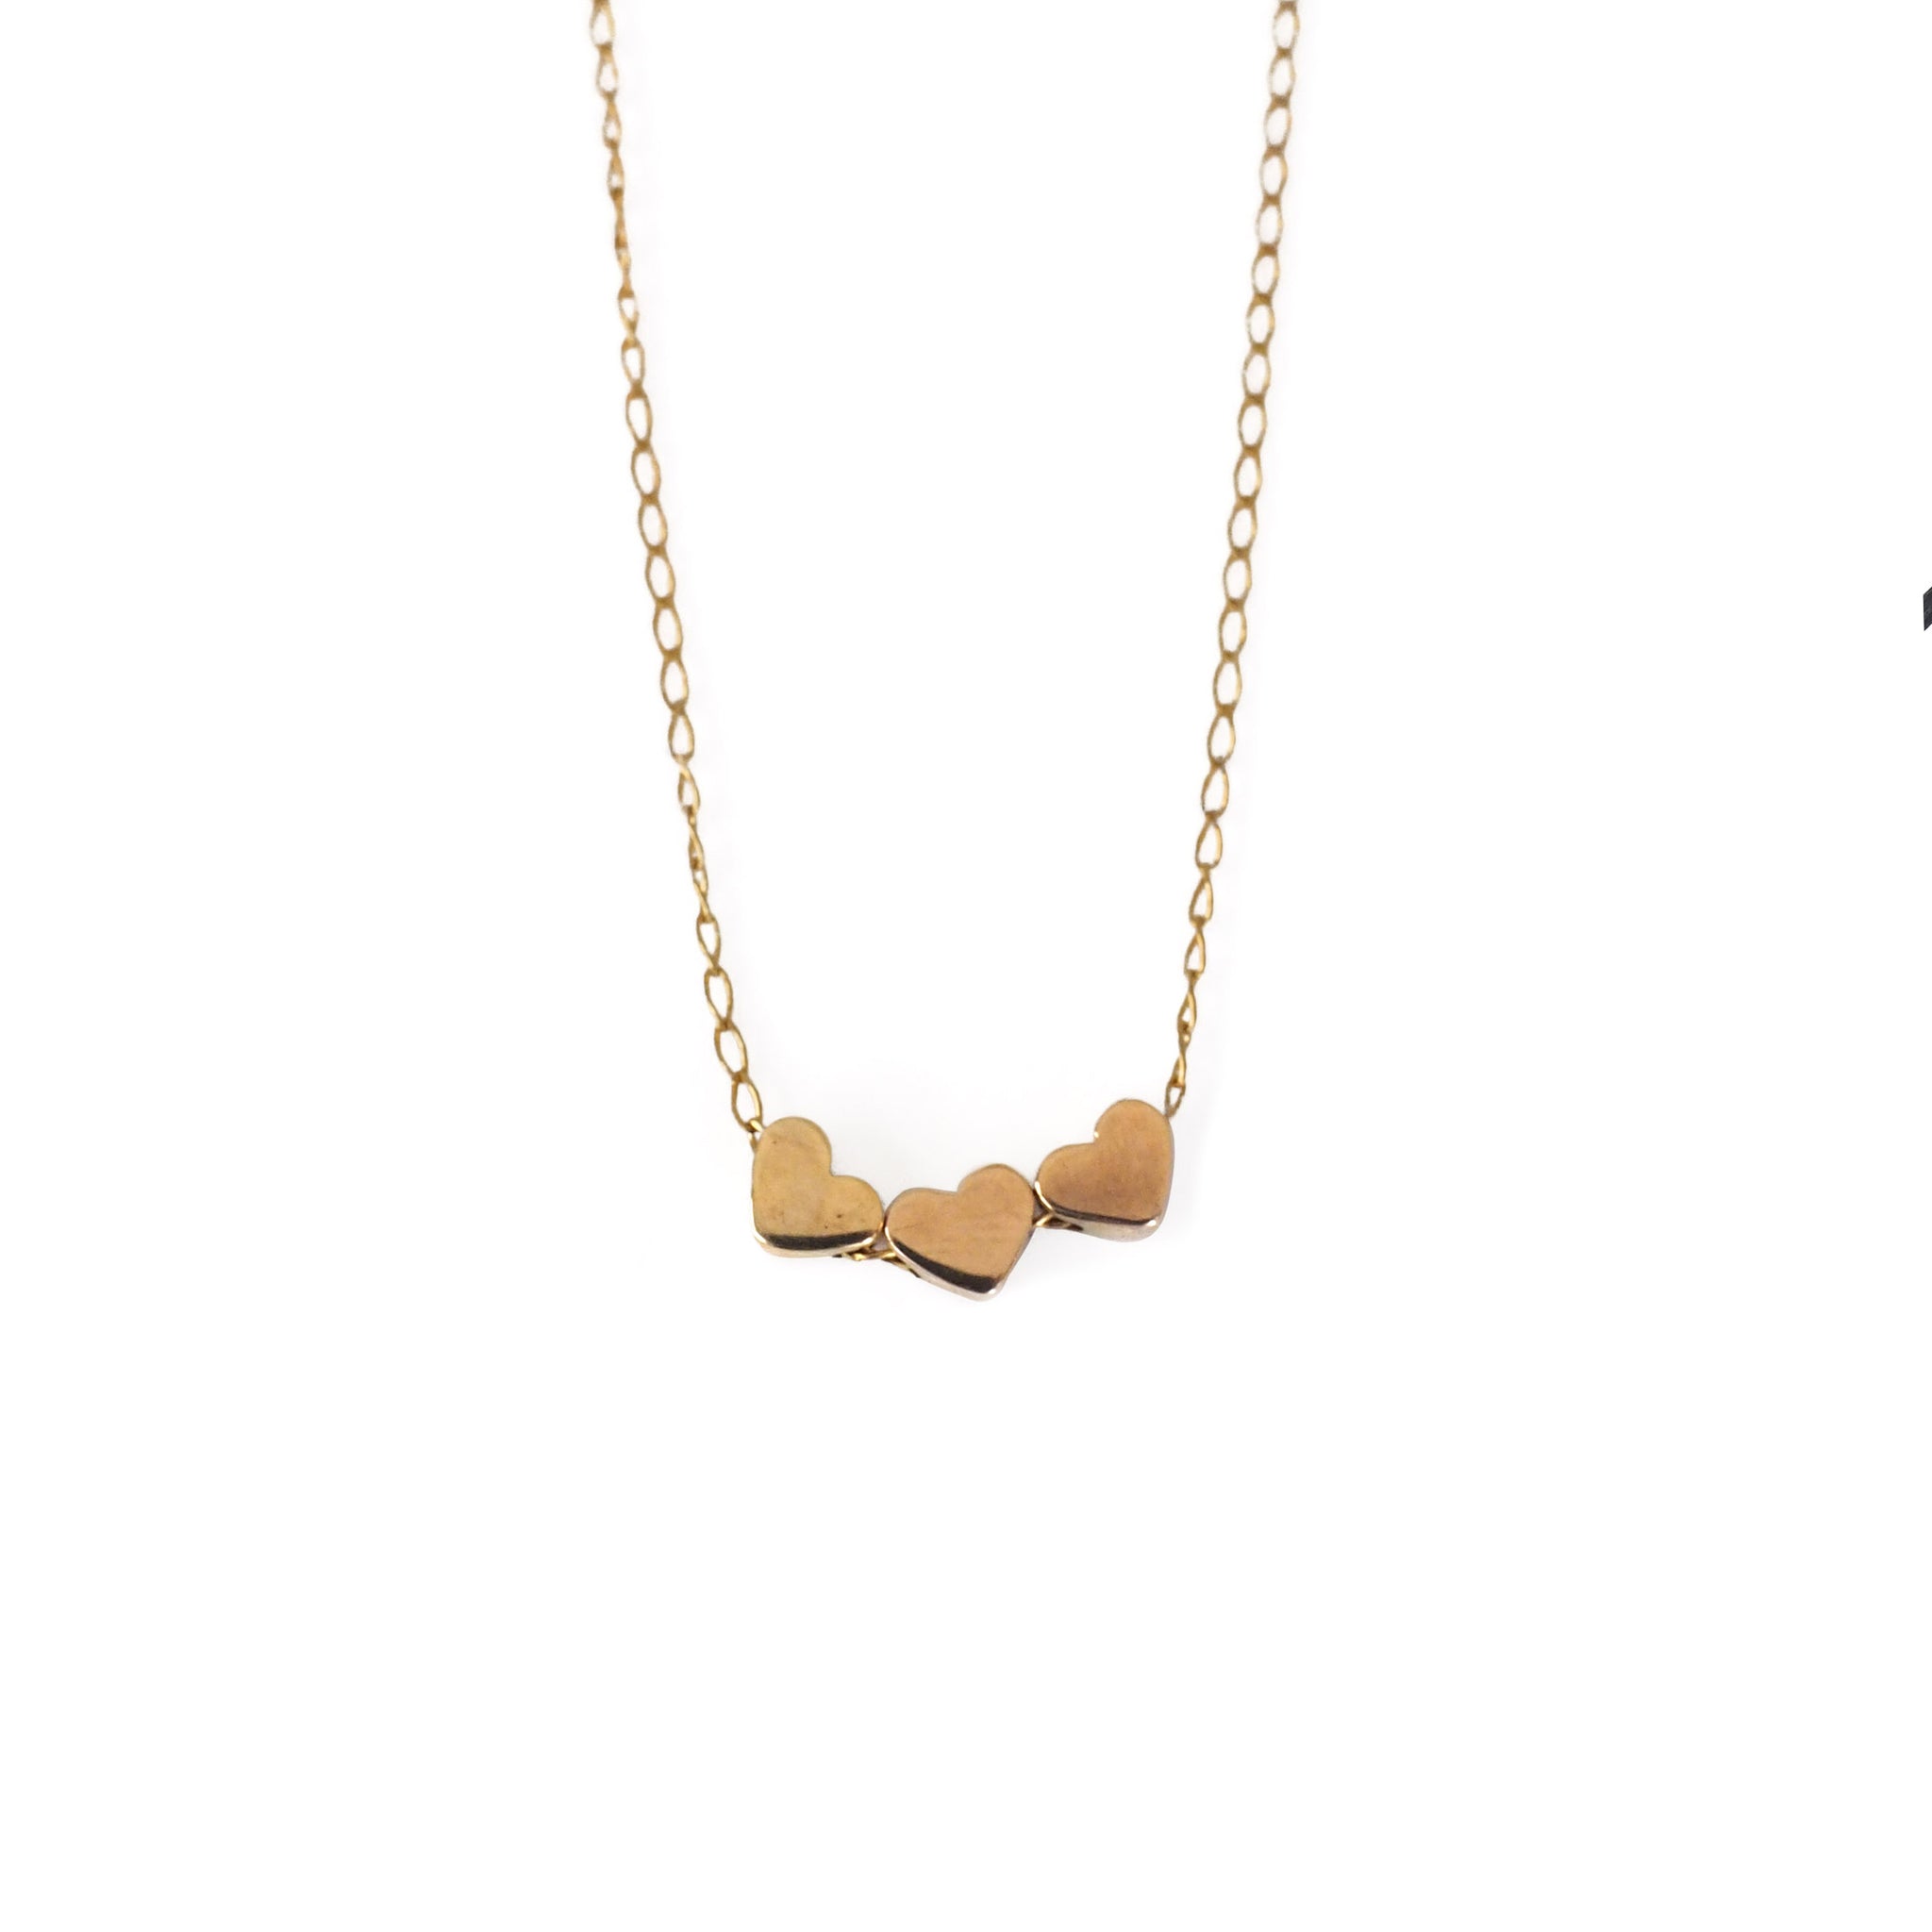 The Sweetheart Necklace in 10K Gold